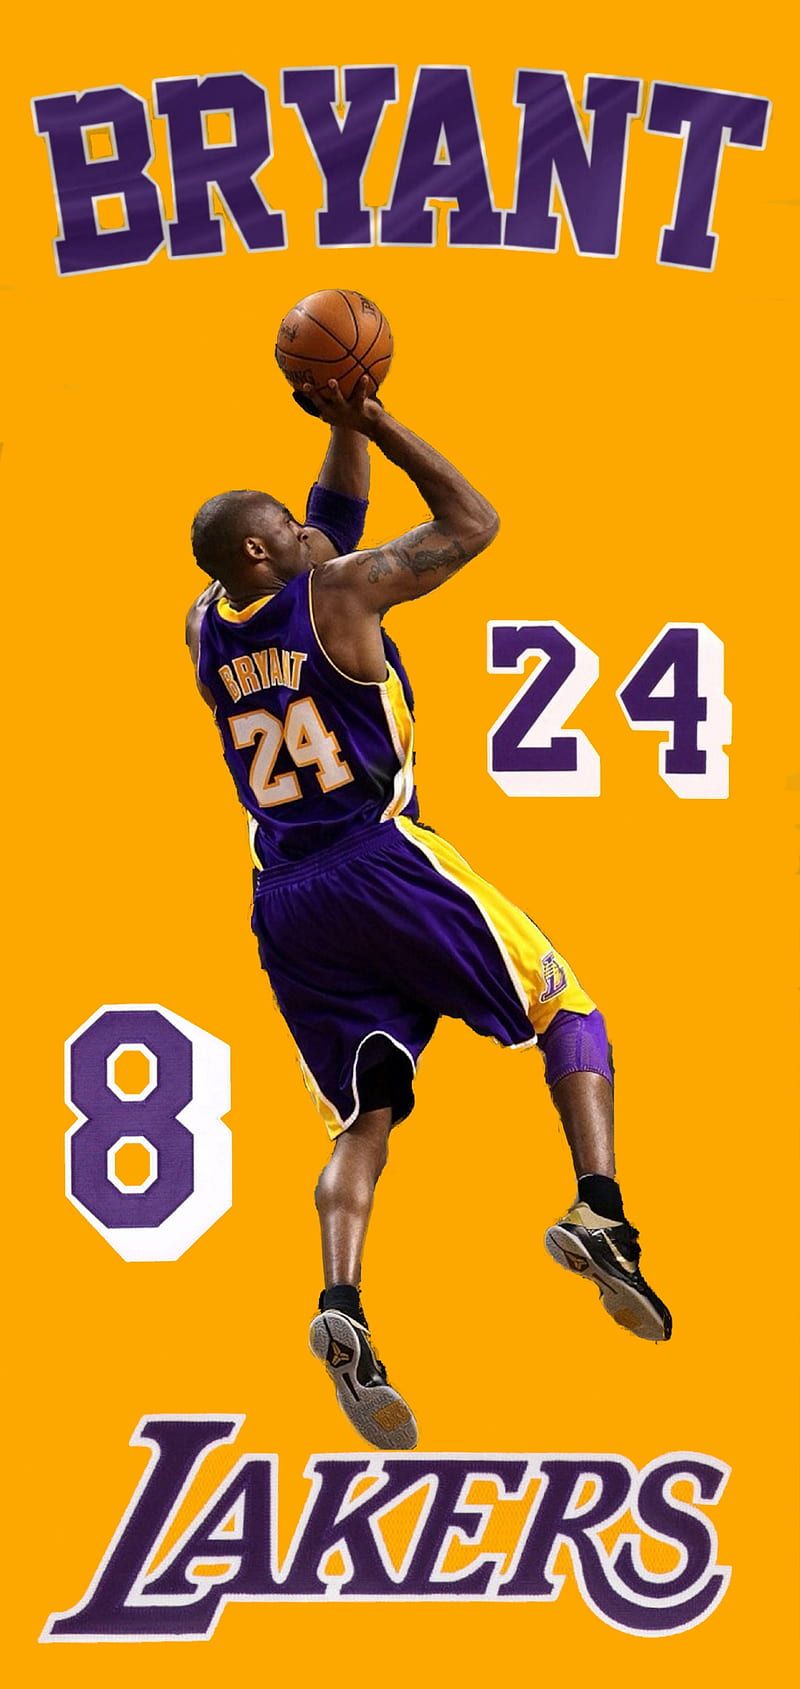 Kobe Bryant wallpaper for iPhone and Android devices. You can download this wallpaper from the link below. - Los Angeles Lakers